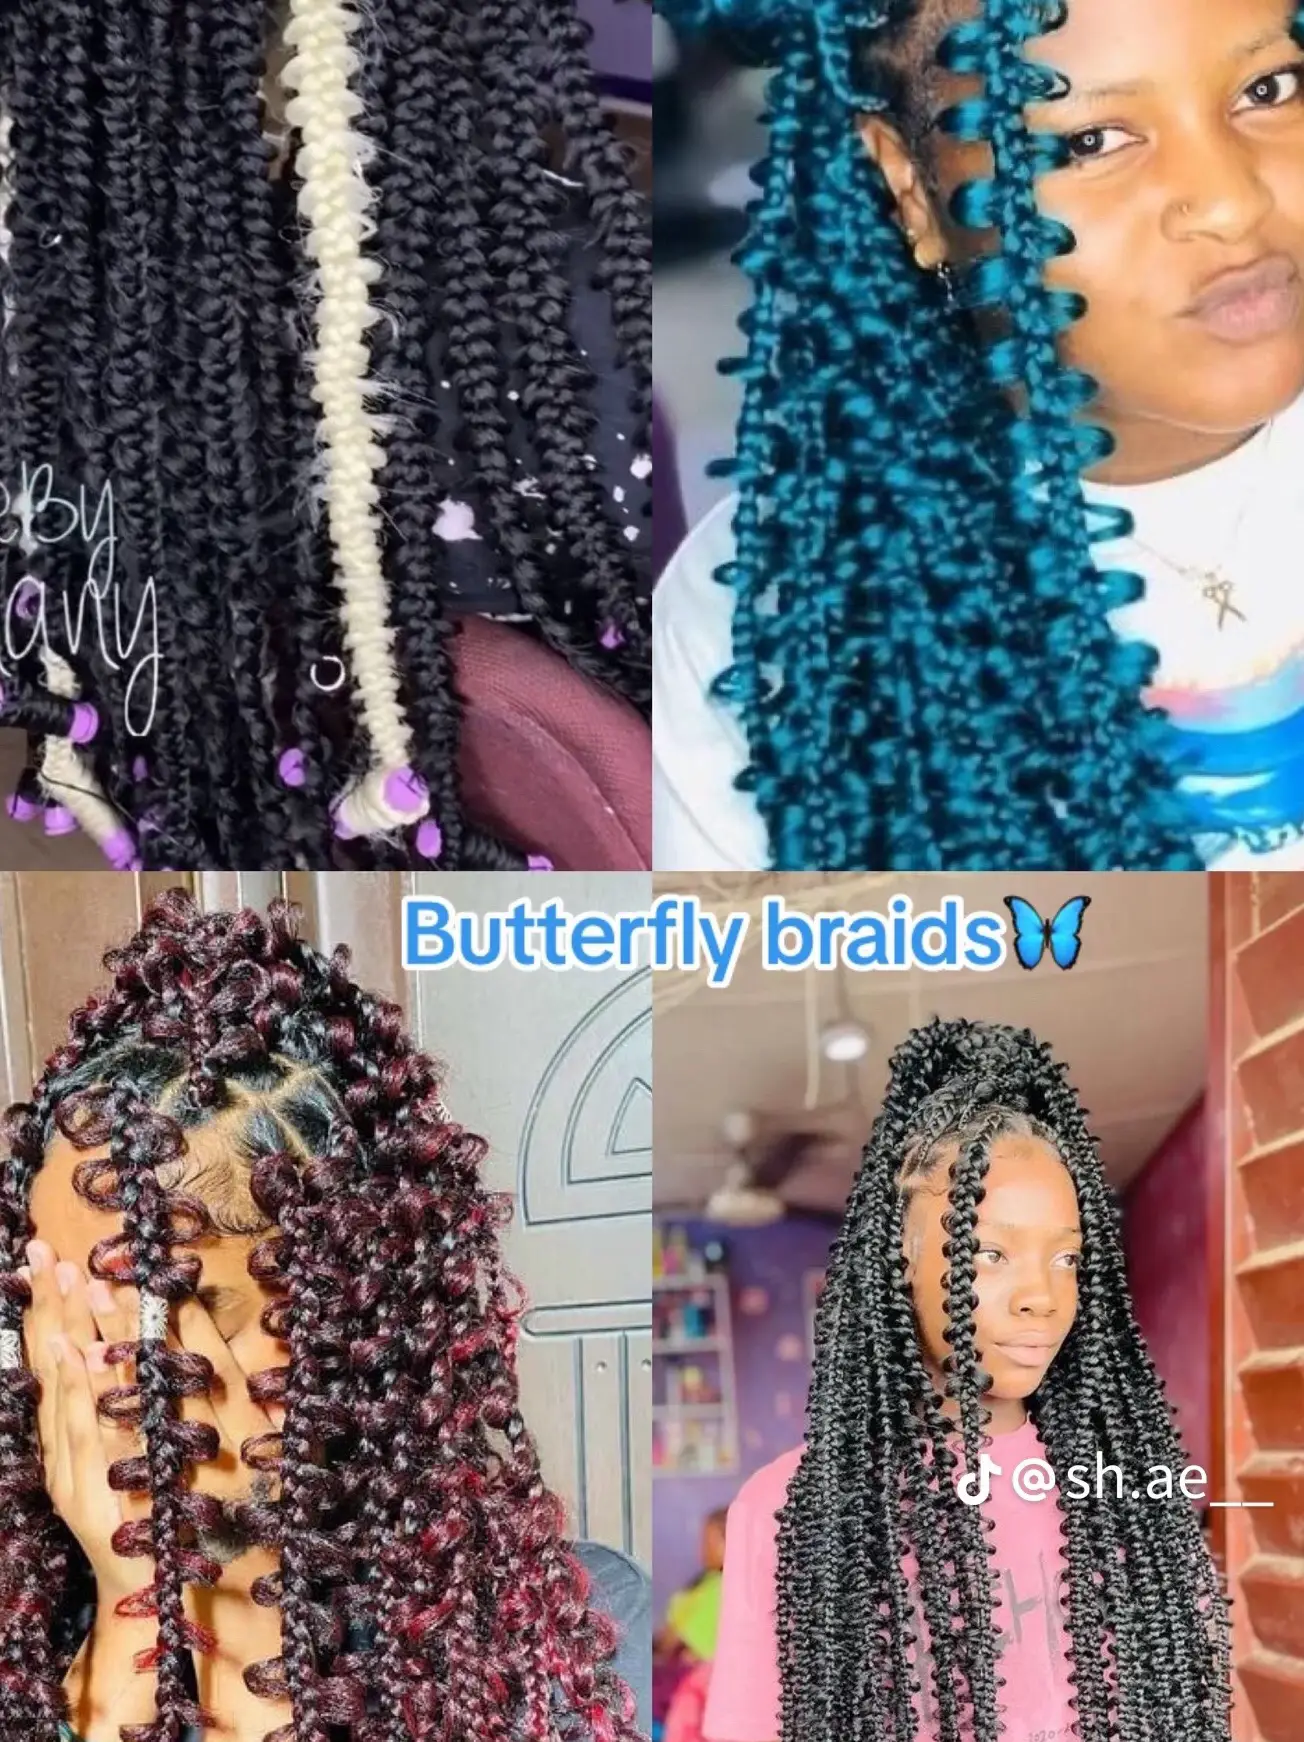 M-L diamond part braids! 😍 . . . Always know, you can have